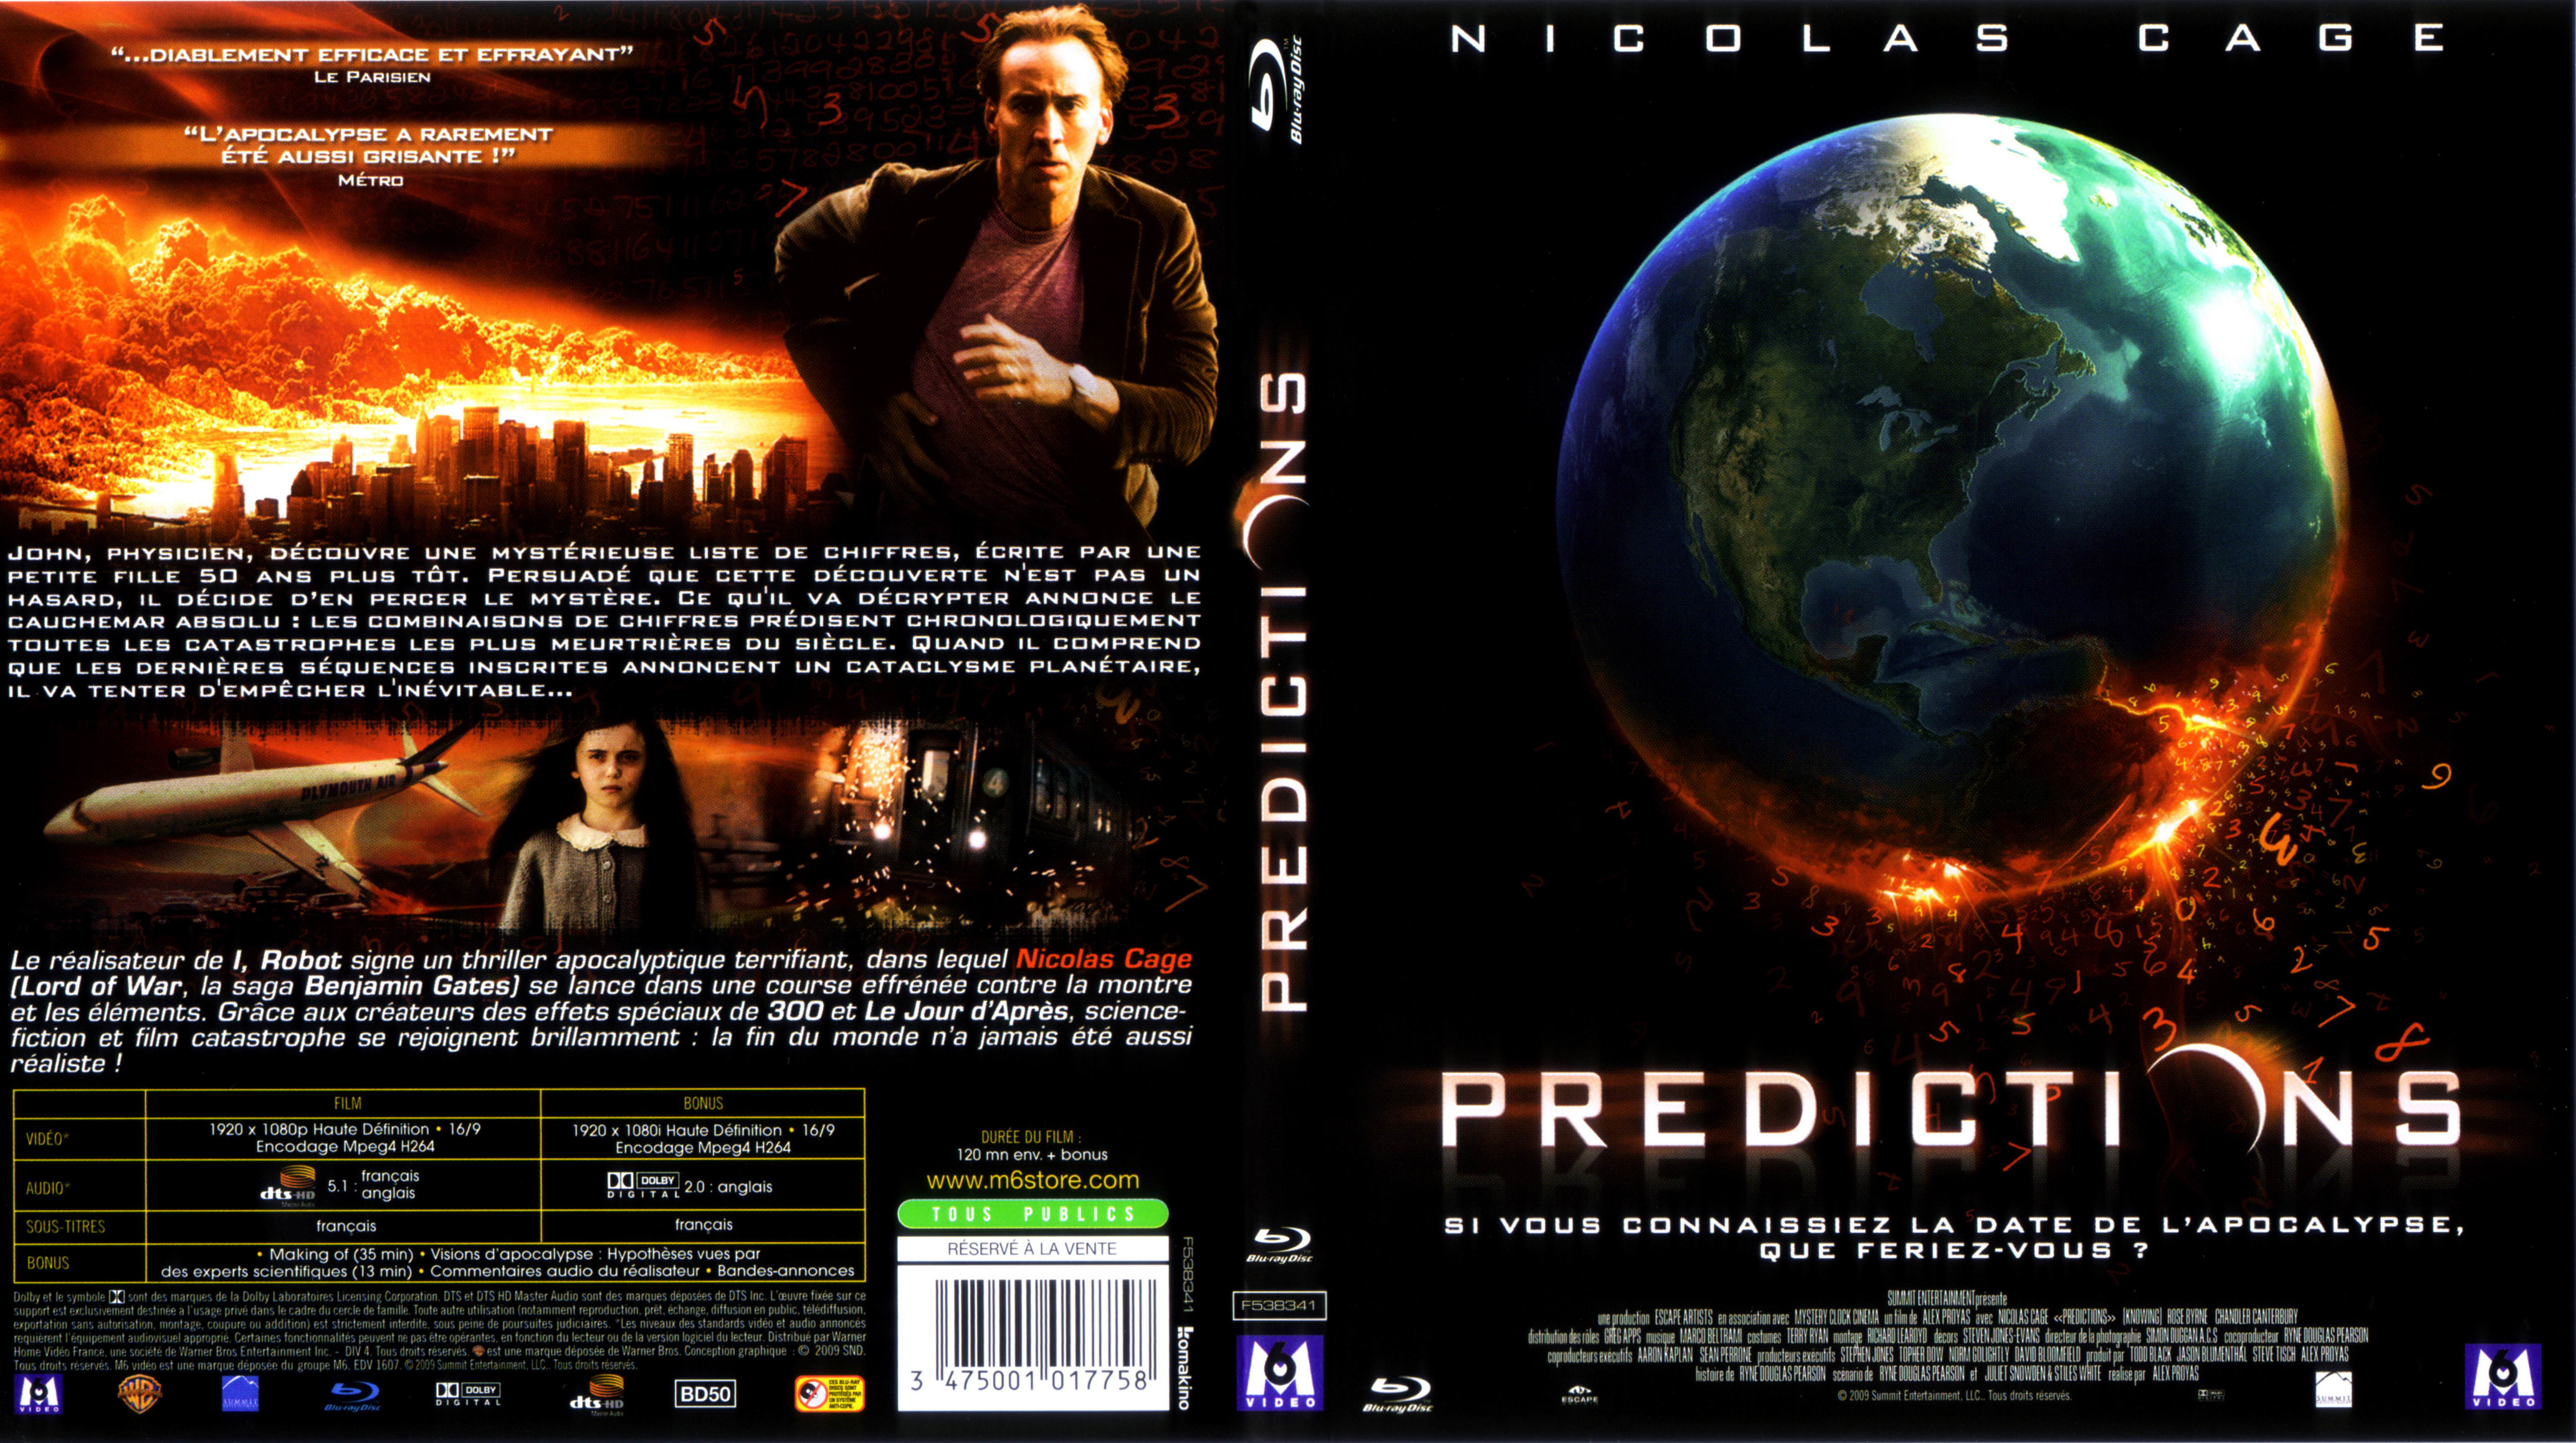 Jaquette DVD Predictions (BLU-RAY)